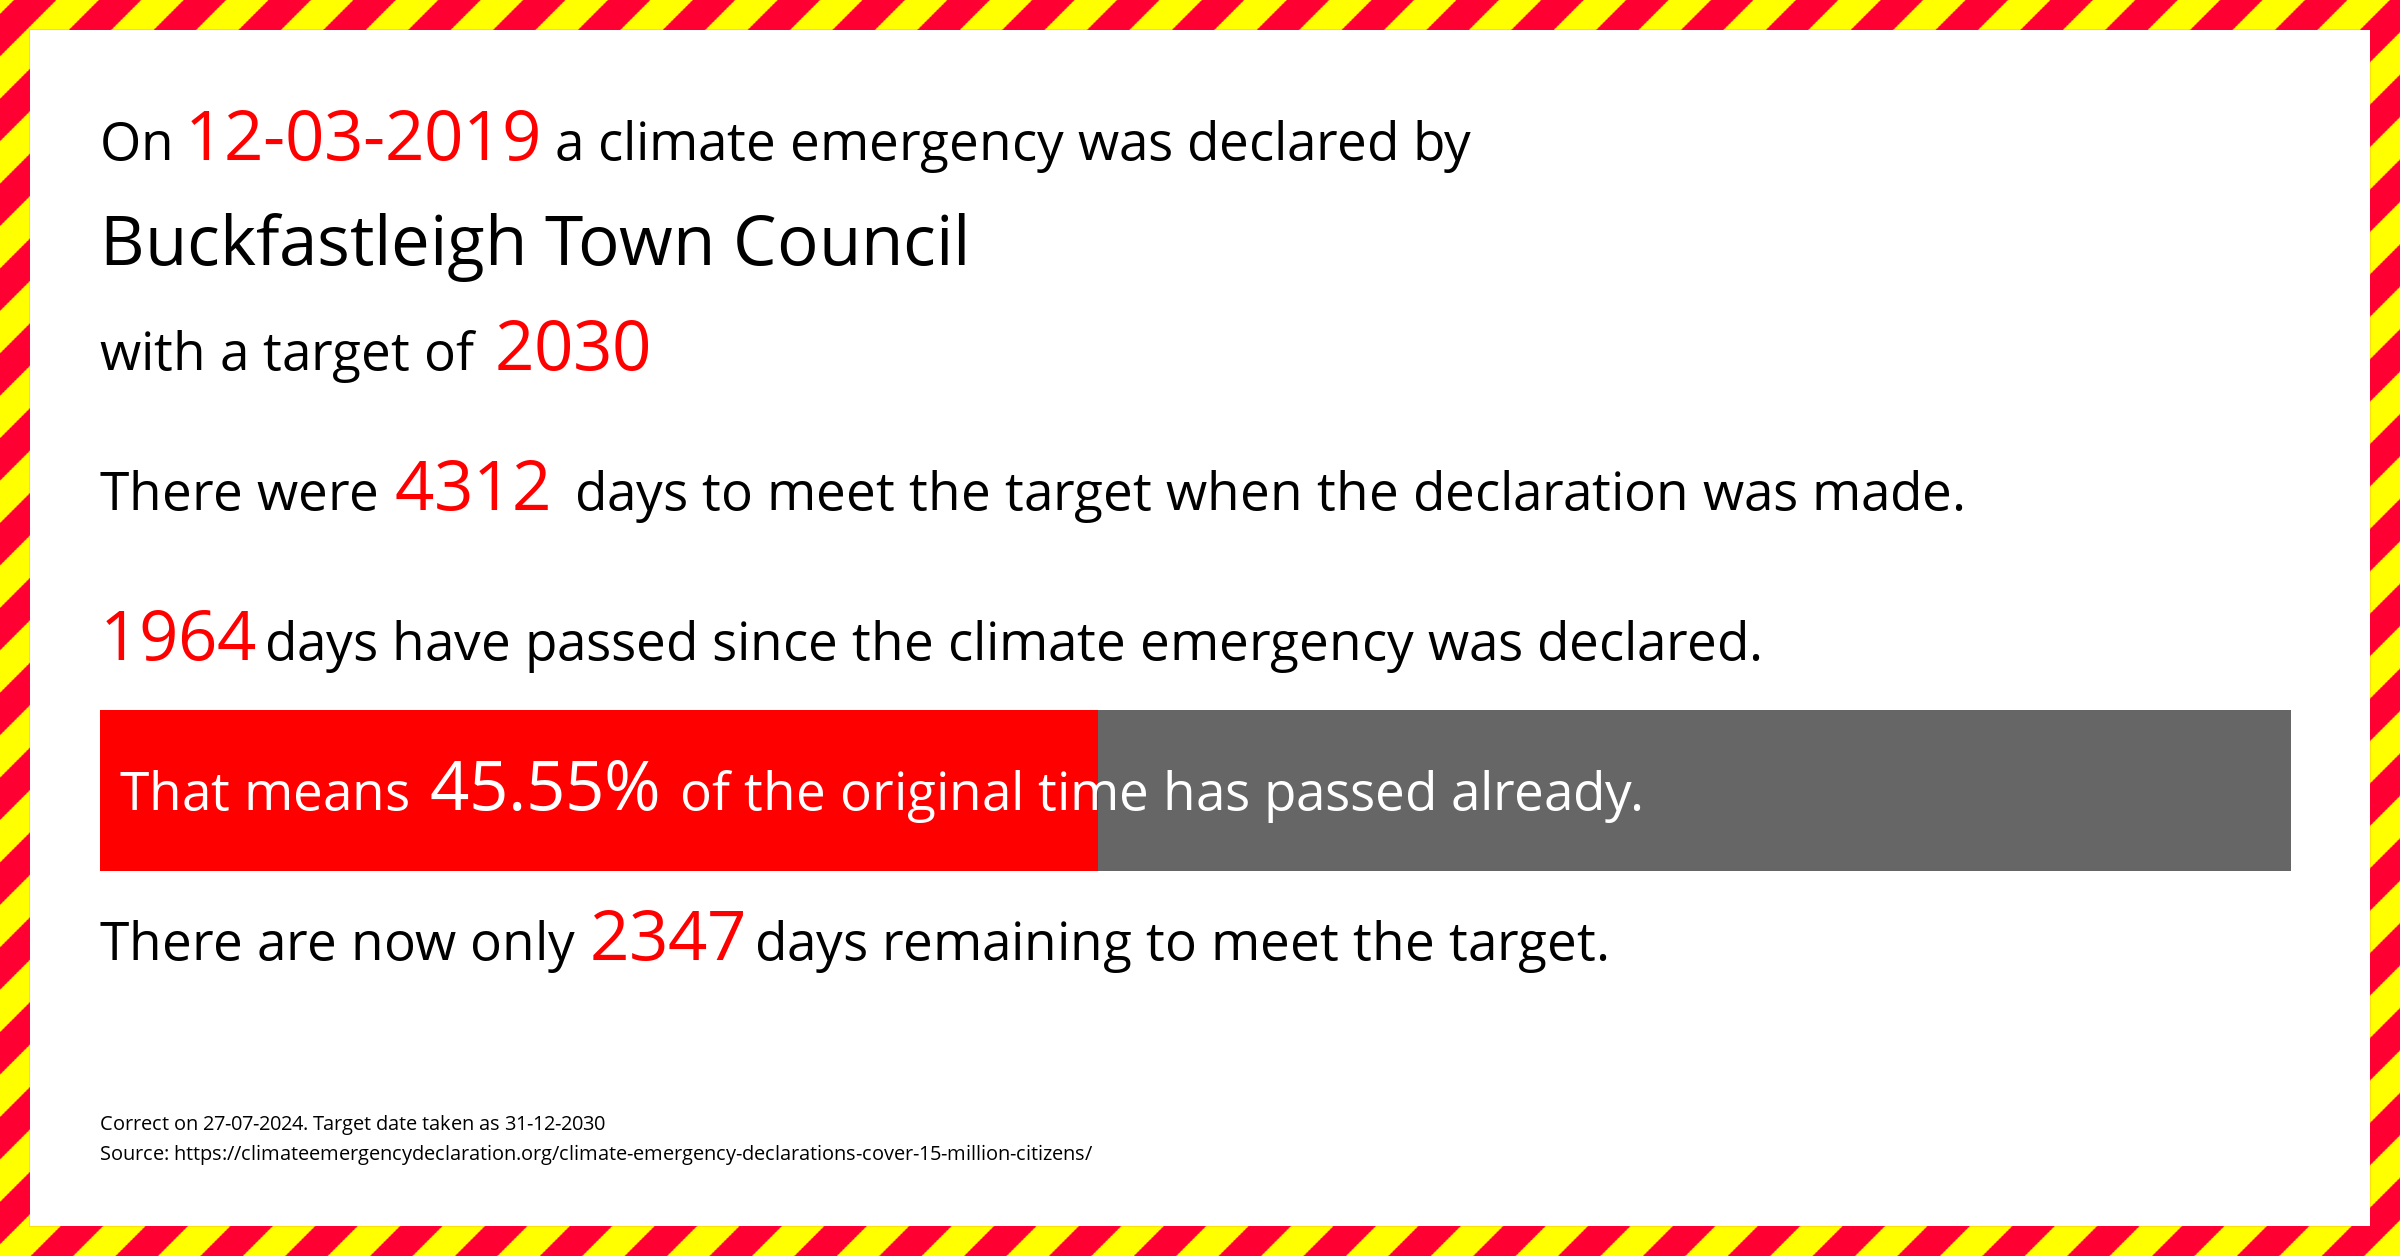 Buckfastleigh Town Council declared a Climate emergency on Tuesday 12th March 2019, with a target of 2030.